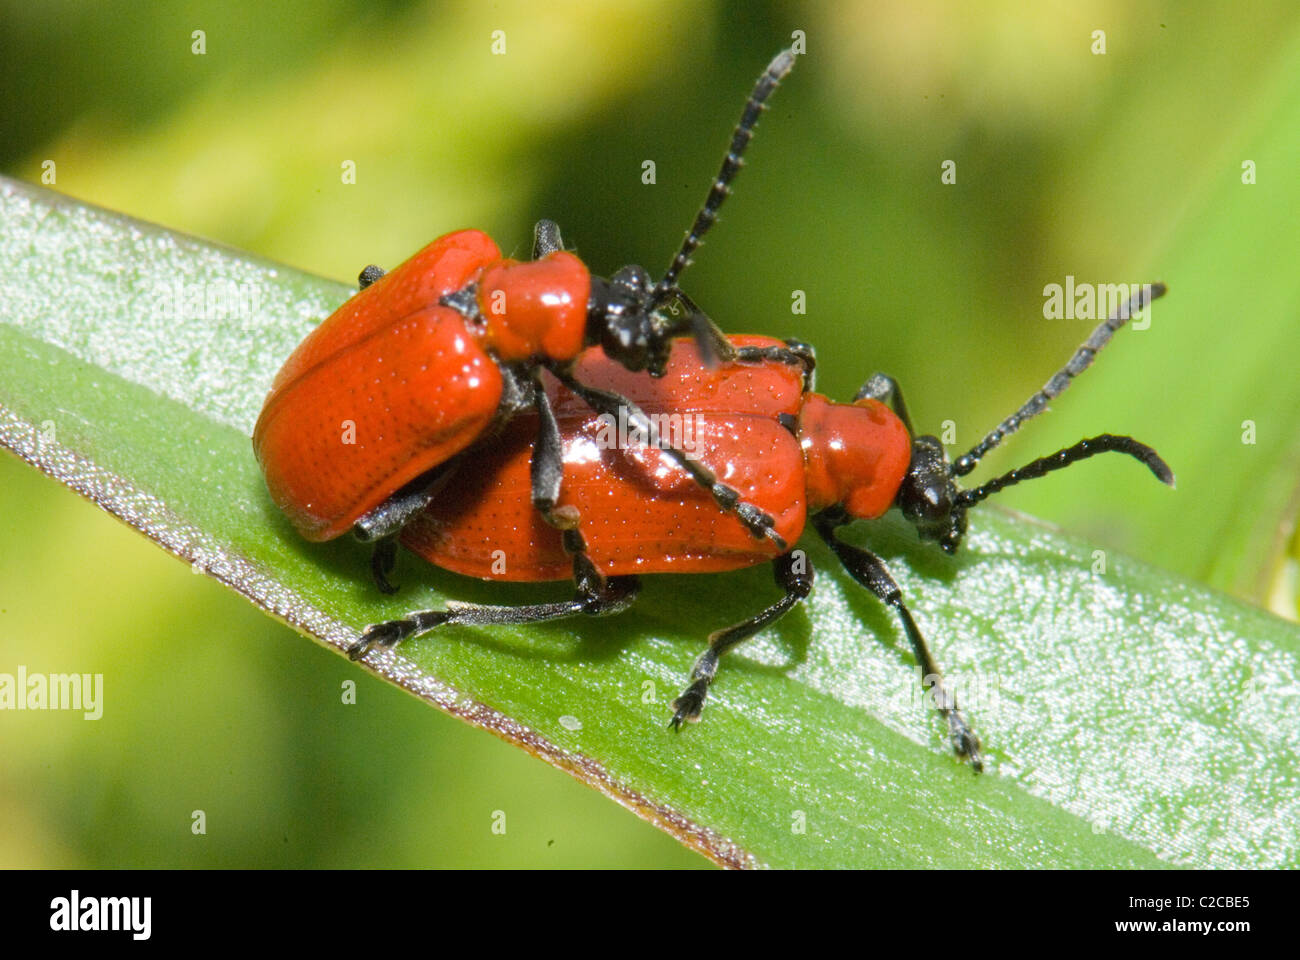 Two lily beetles, Lilioceris lilii, mating on the strap-like leaves of a lily (lilium) Stock Photo